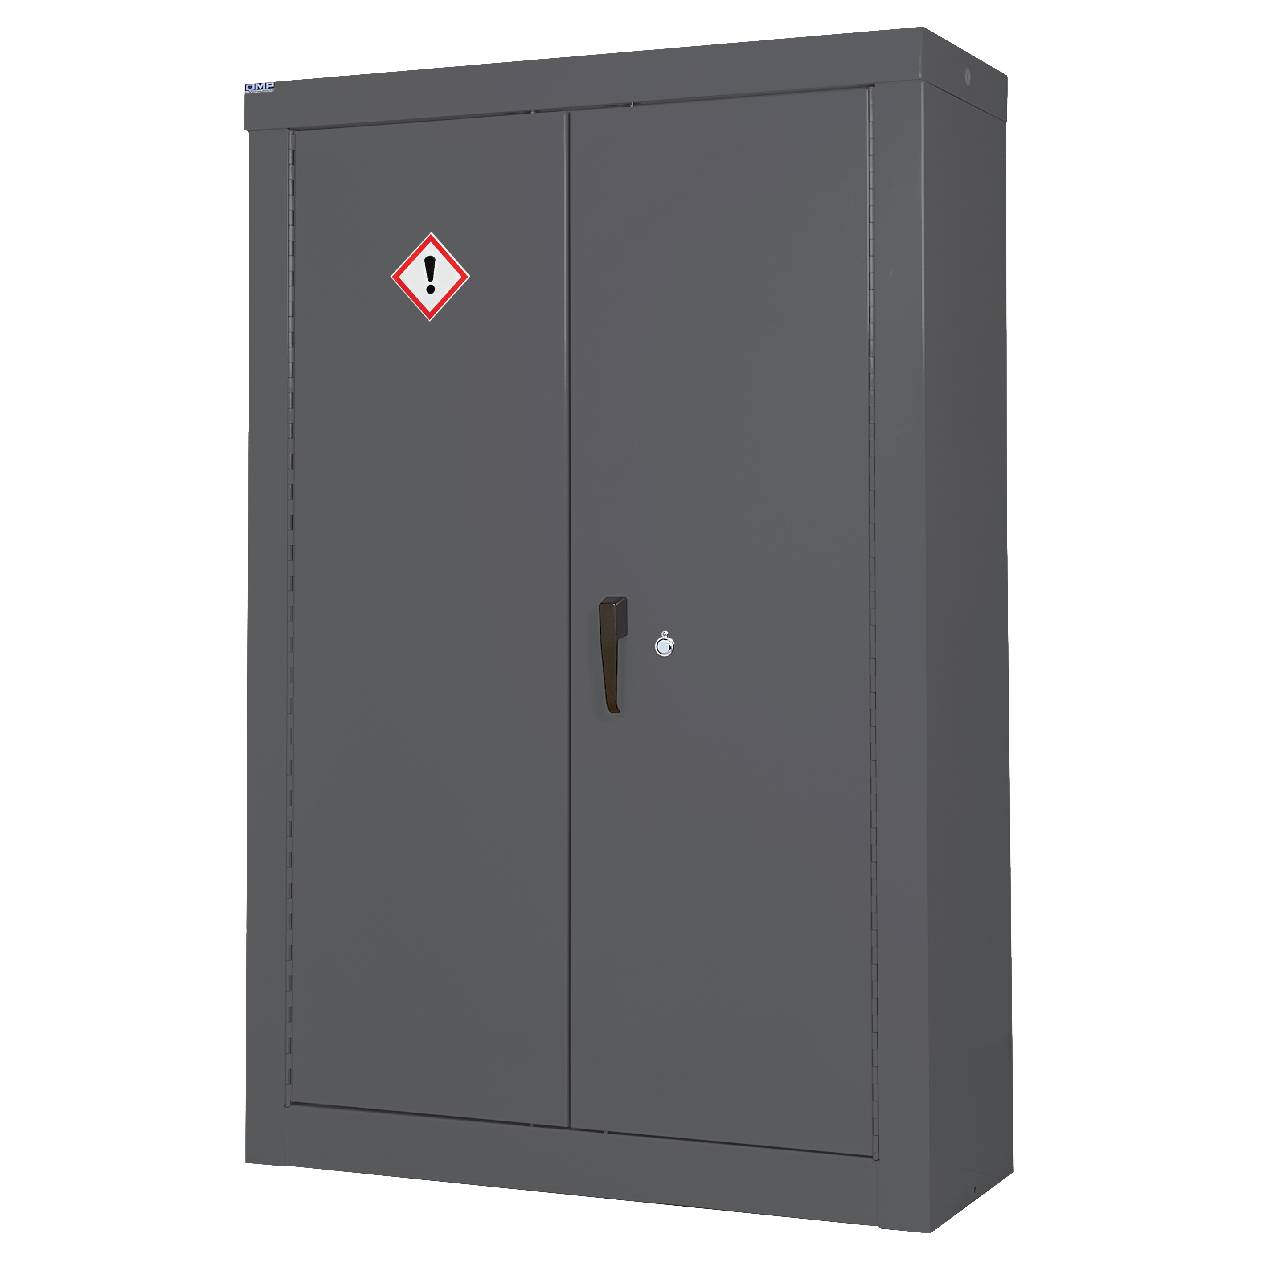 QMP COSHH Floor Standing Security Cabinets - 1800H x 1200W x 460D mm